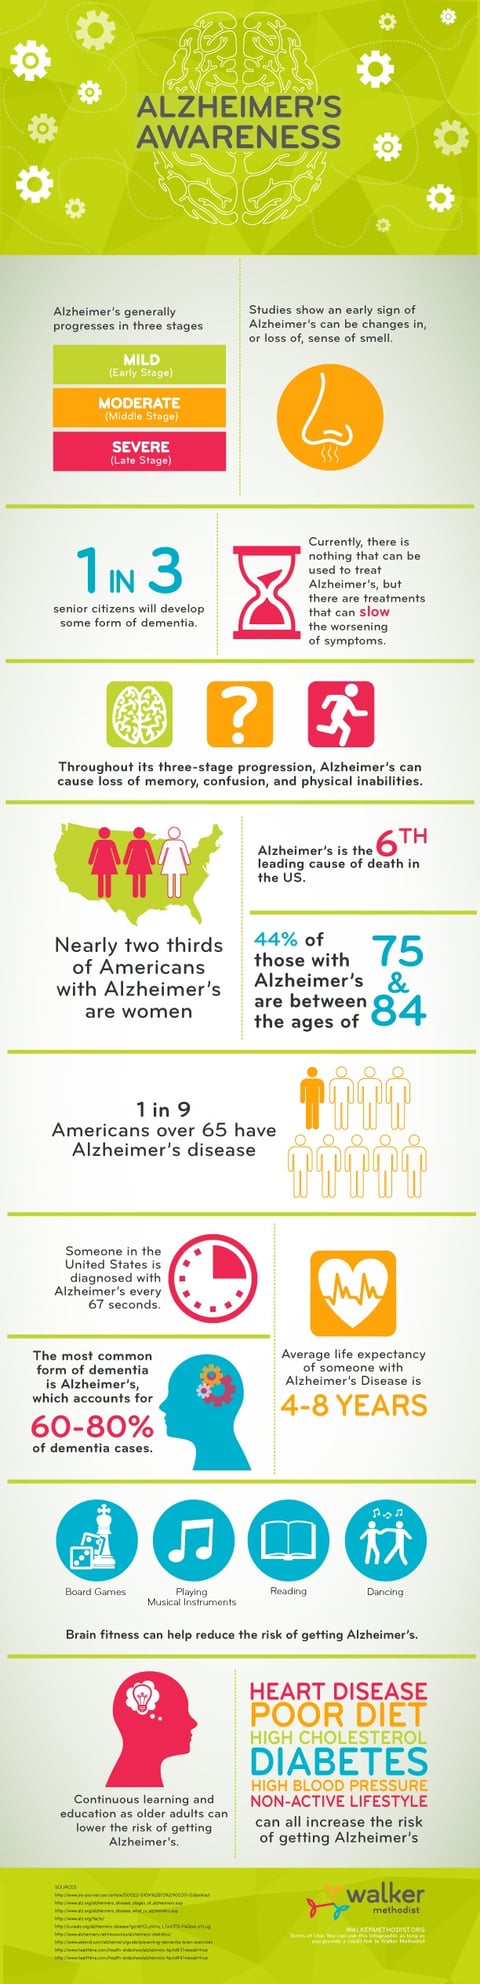 Facts About Alzheimer's